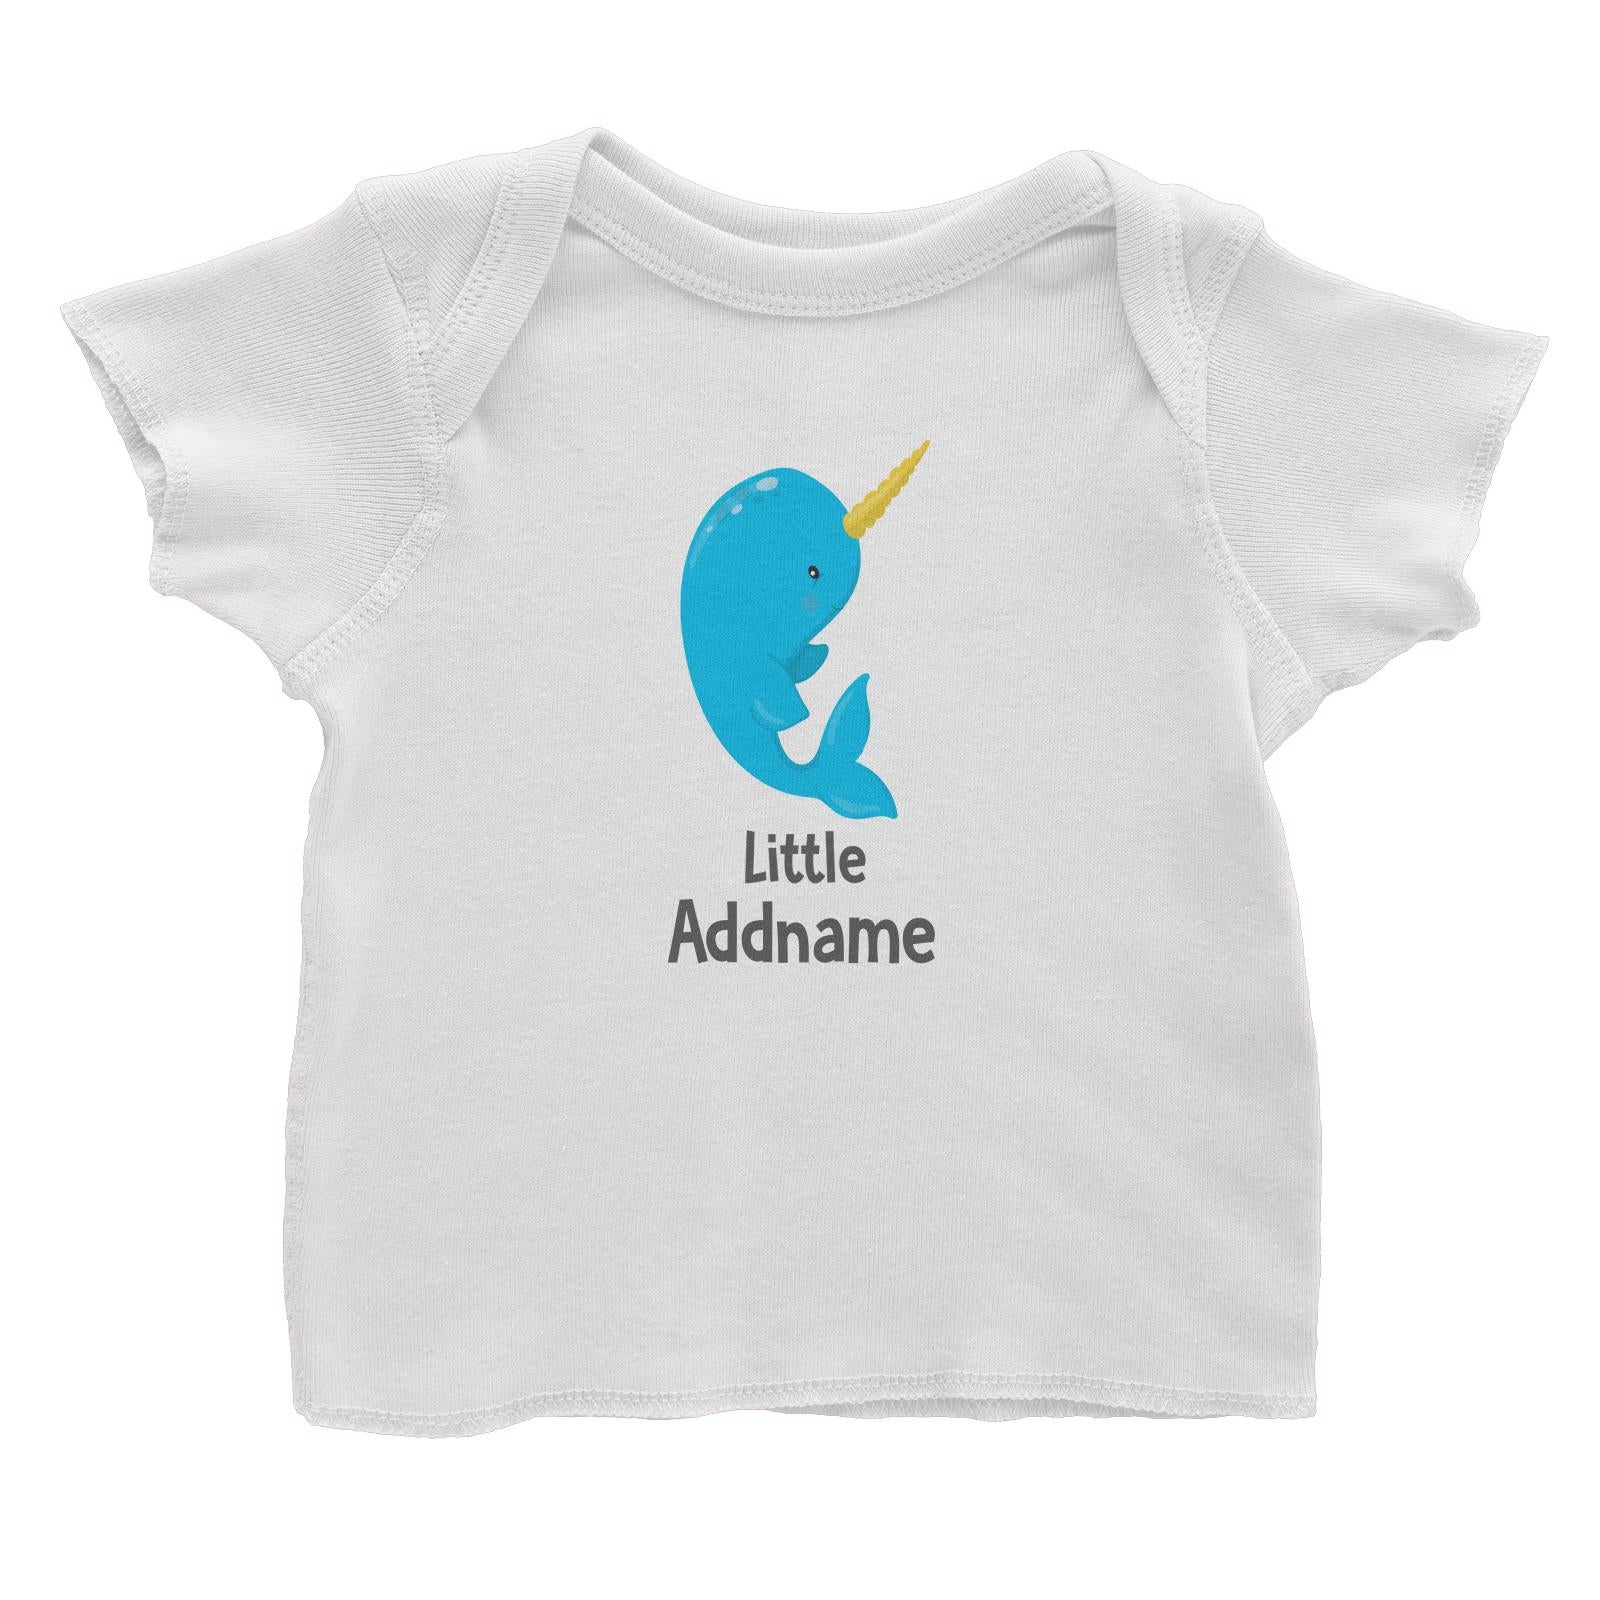 Arctic Animals Little Narwal Unicorn Whale Addname Baby T-Shirt